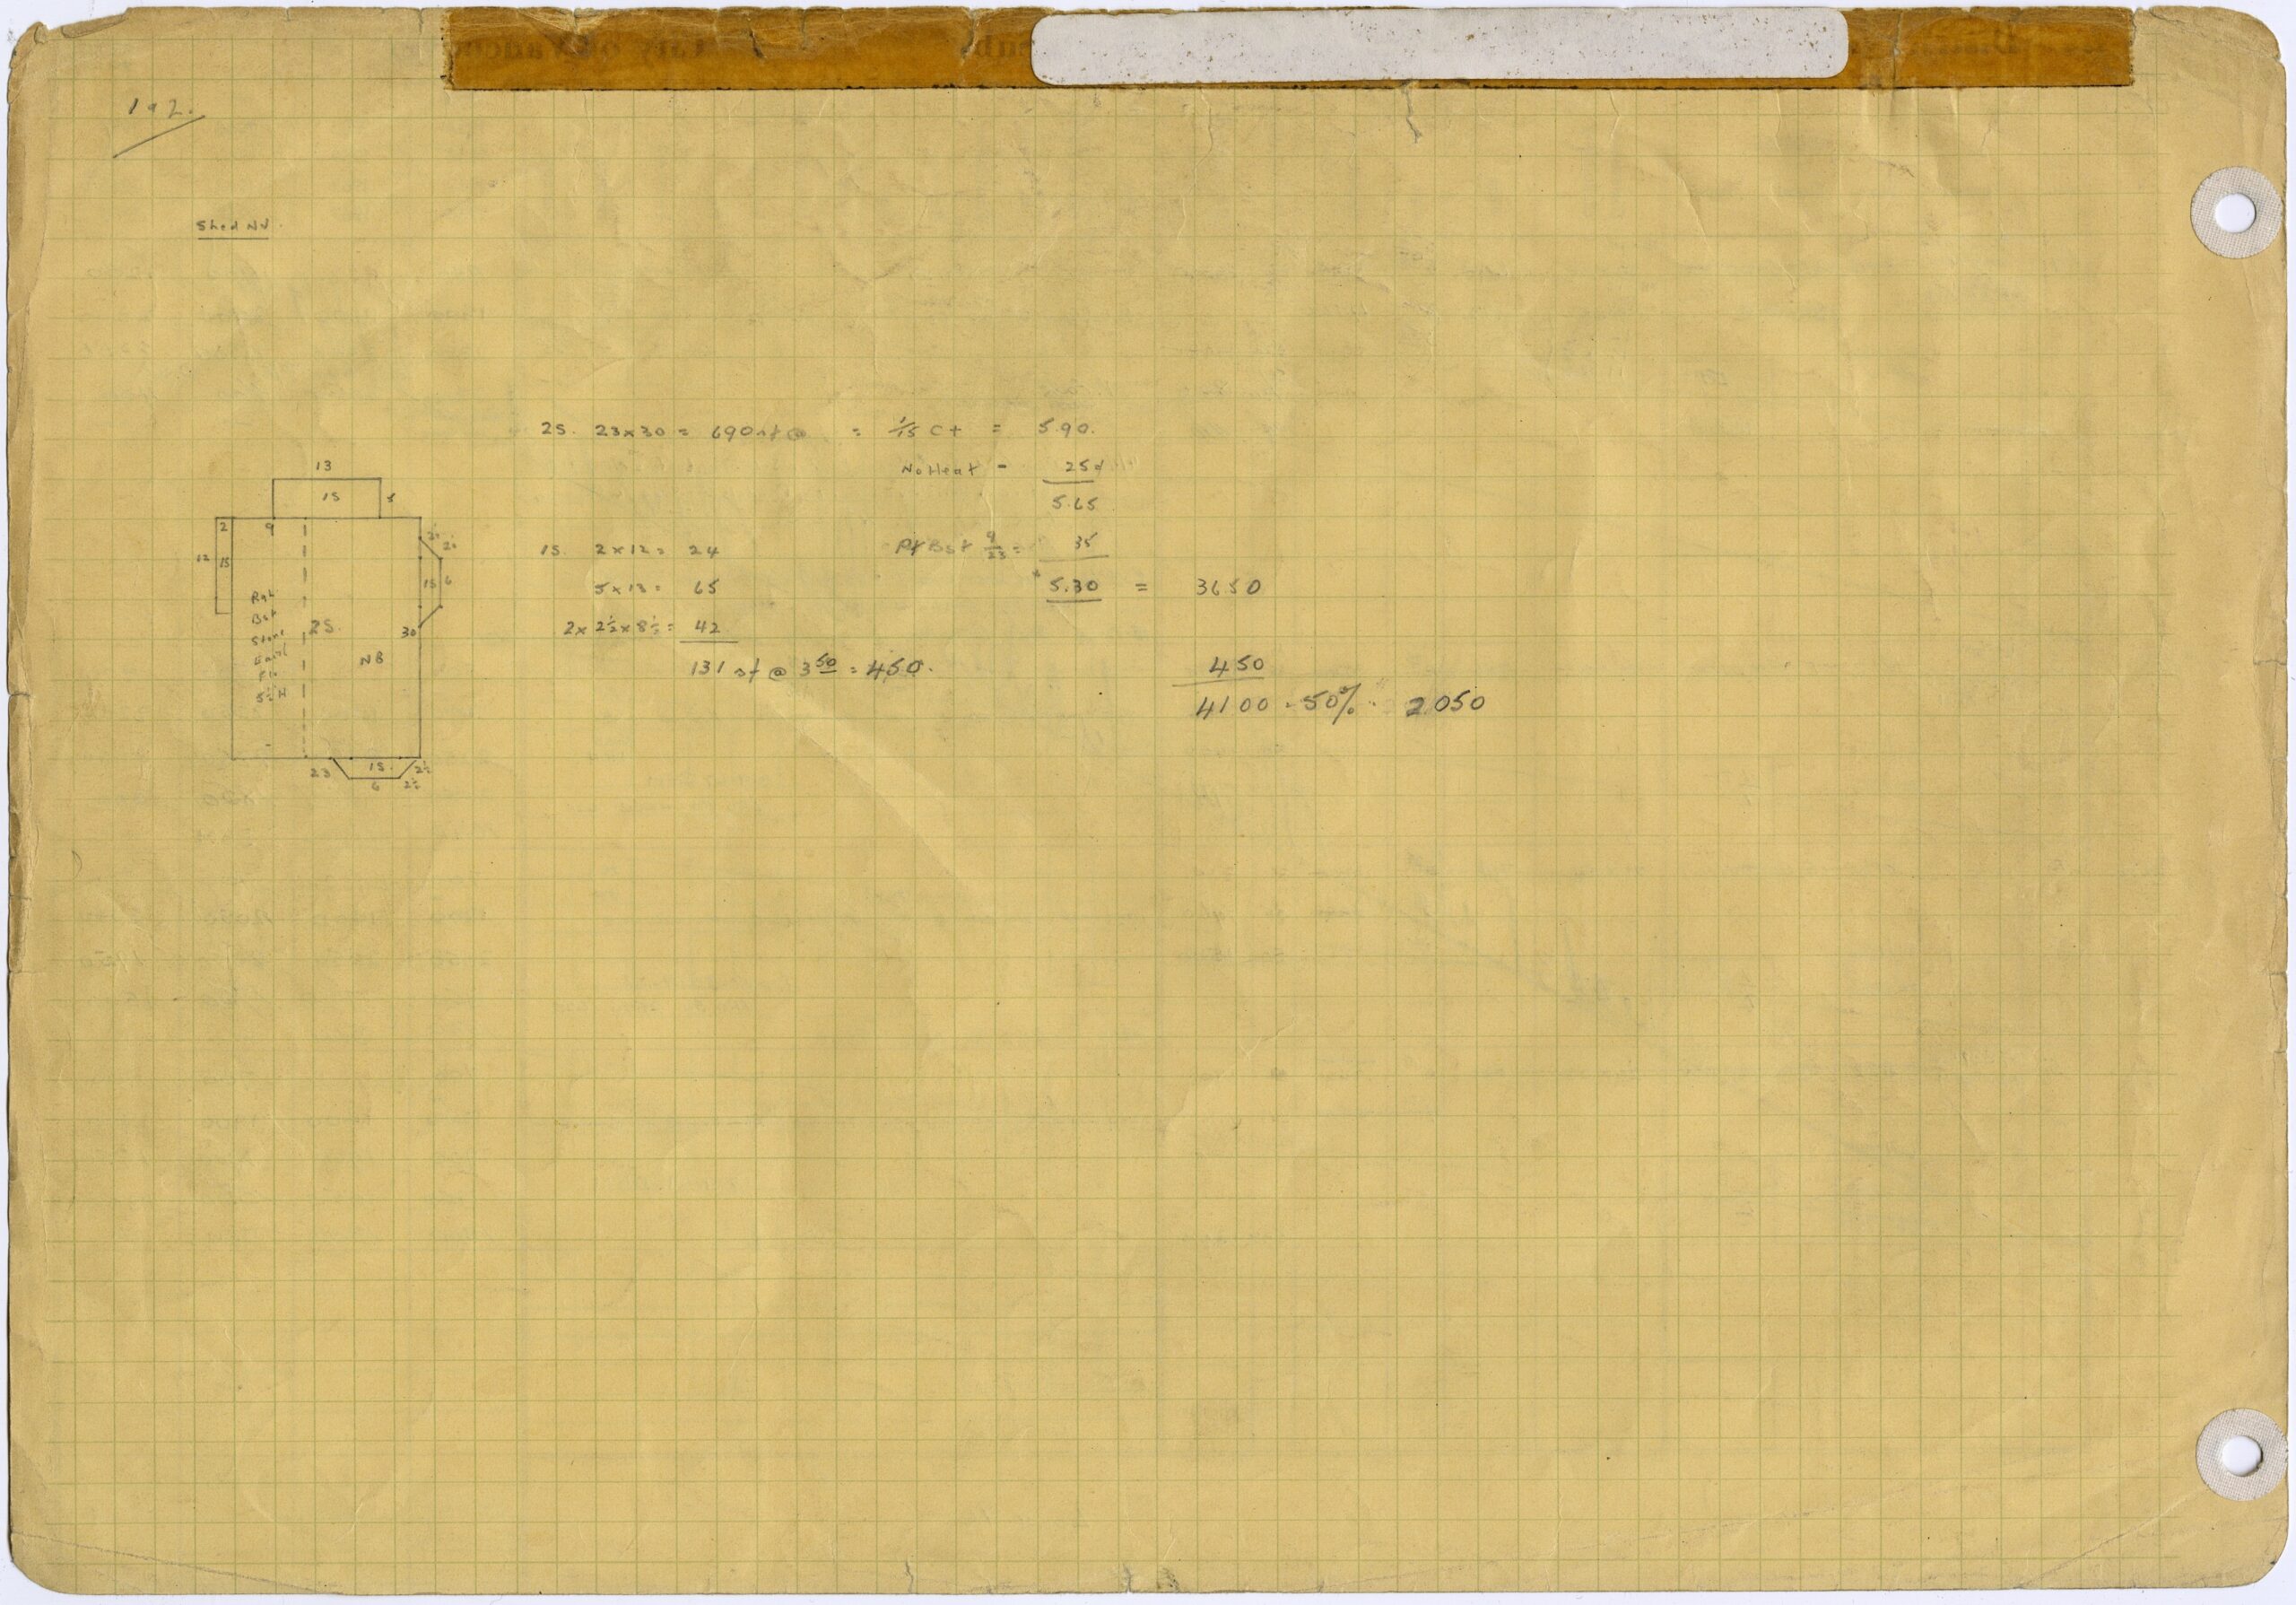 Back of the Property tax appraisal field notes ledger sheet that includes 804 East Cordova Street. An outline of the property with additional notations have been made for this particular address. Reference code: COV-S283--